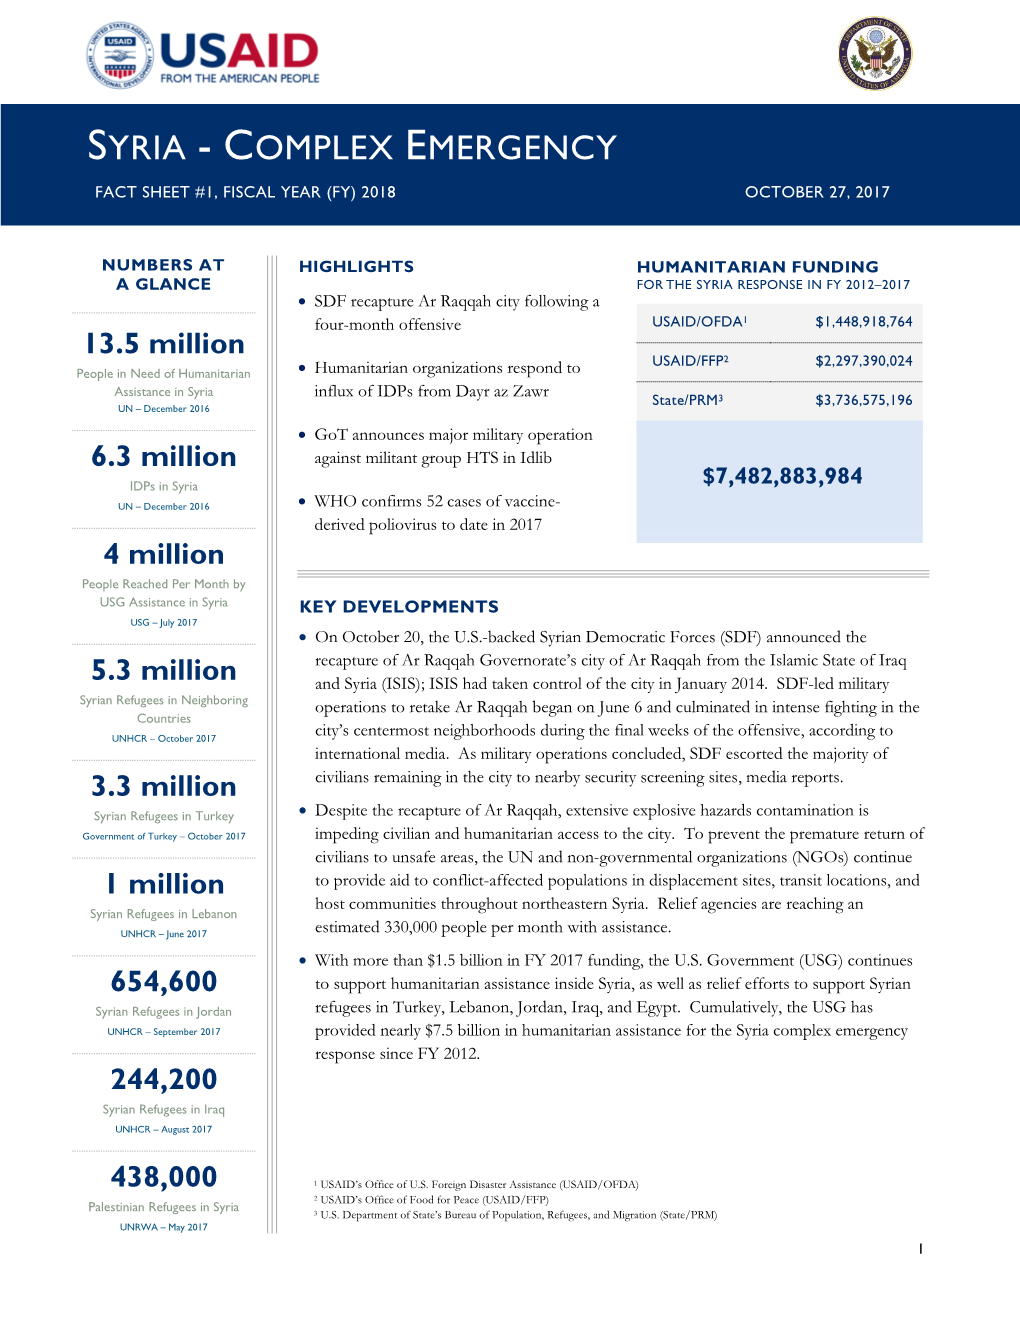 Syria - Complex Emergency Fact Sheet #1, Fiscal Year (Fy) 2018 October 27, 2017